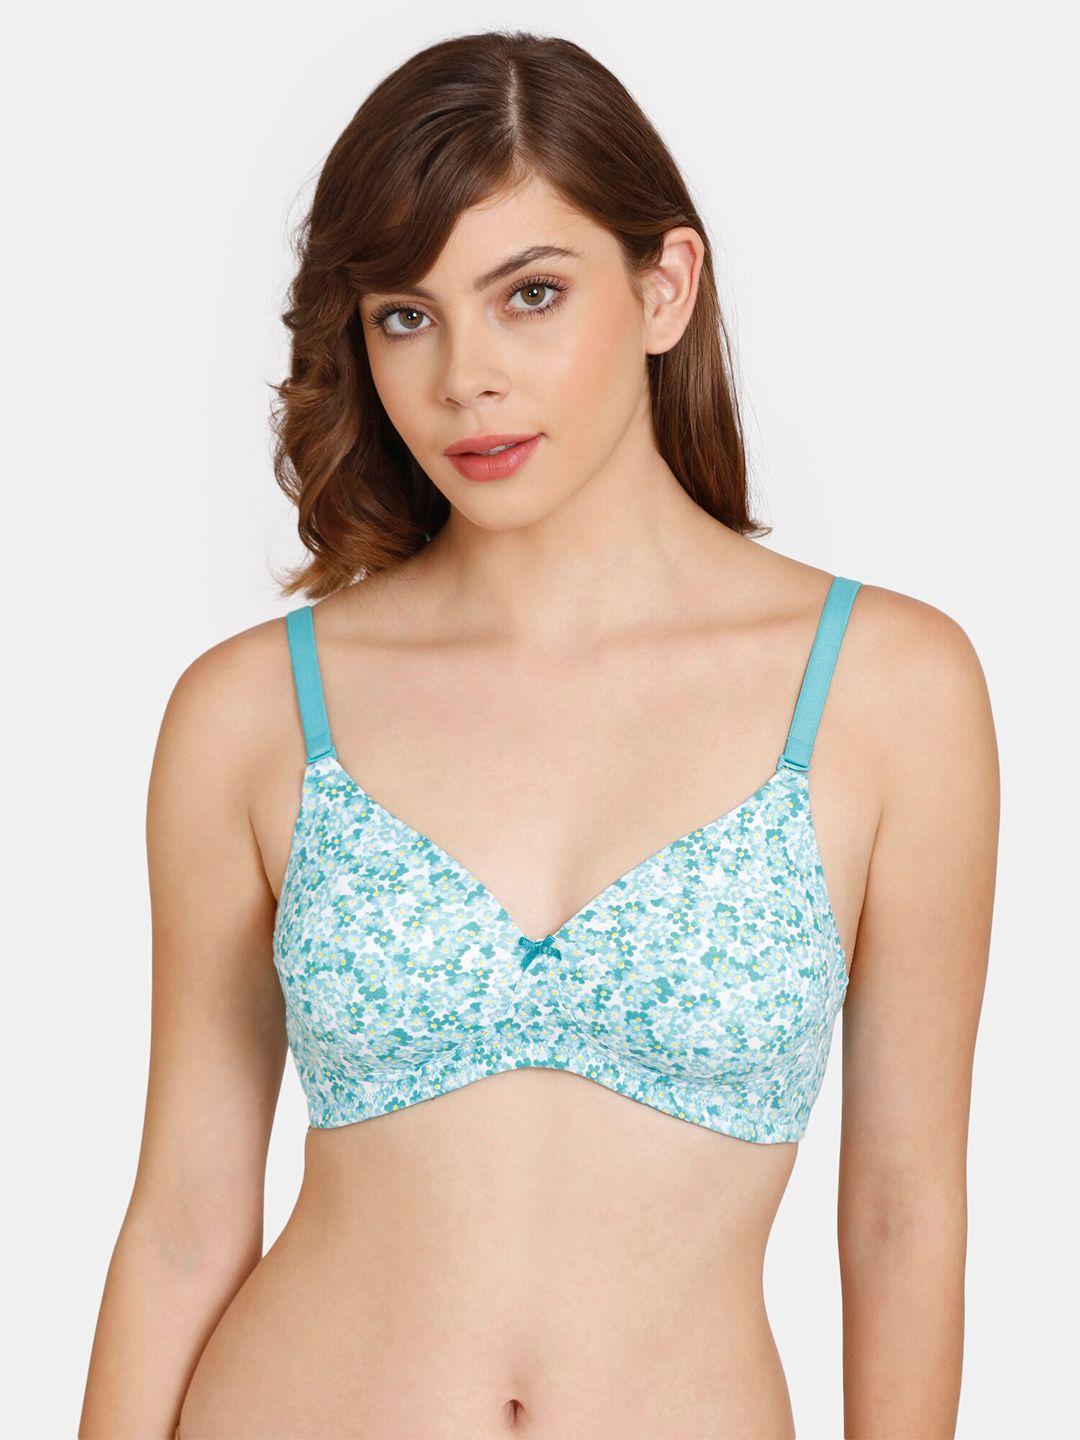 rosaline by zivame sea green & white floral bra lightly padded